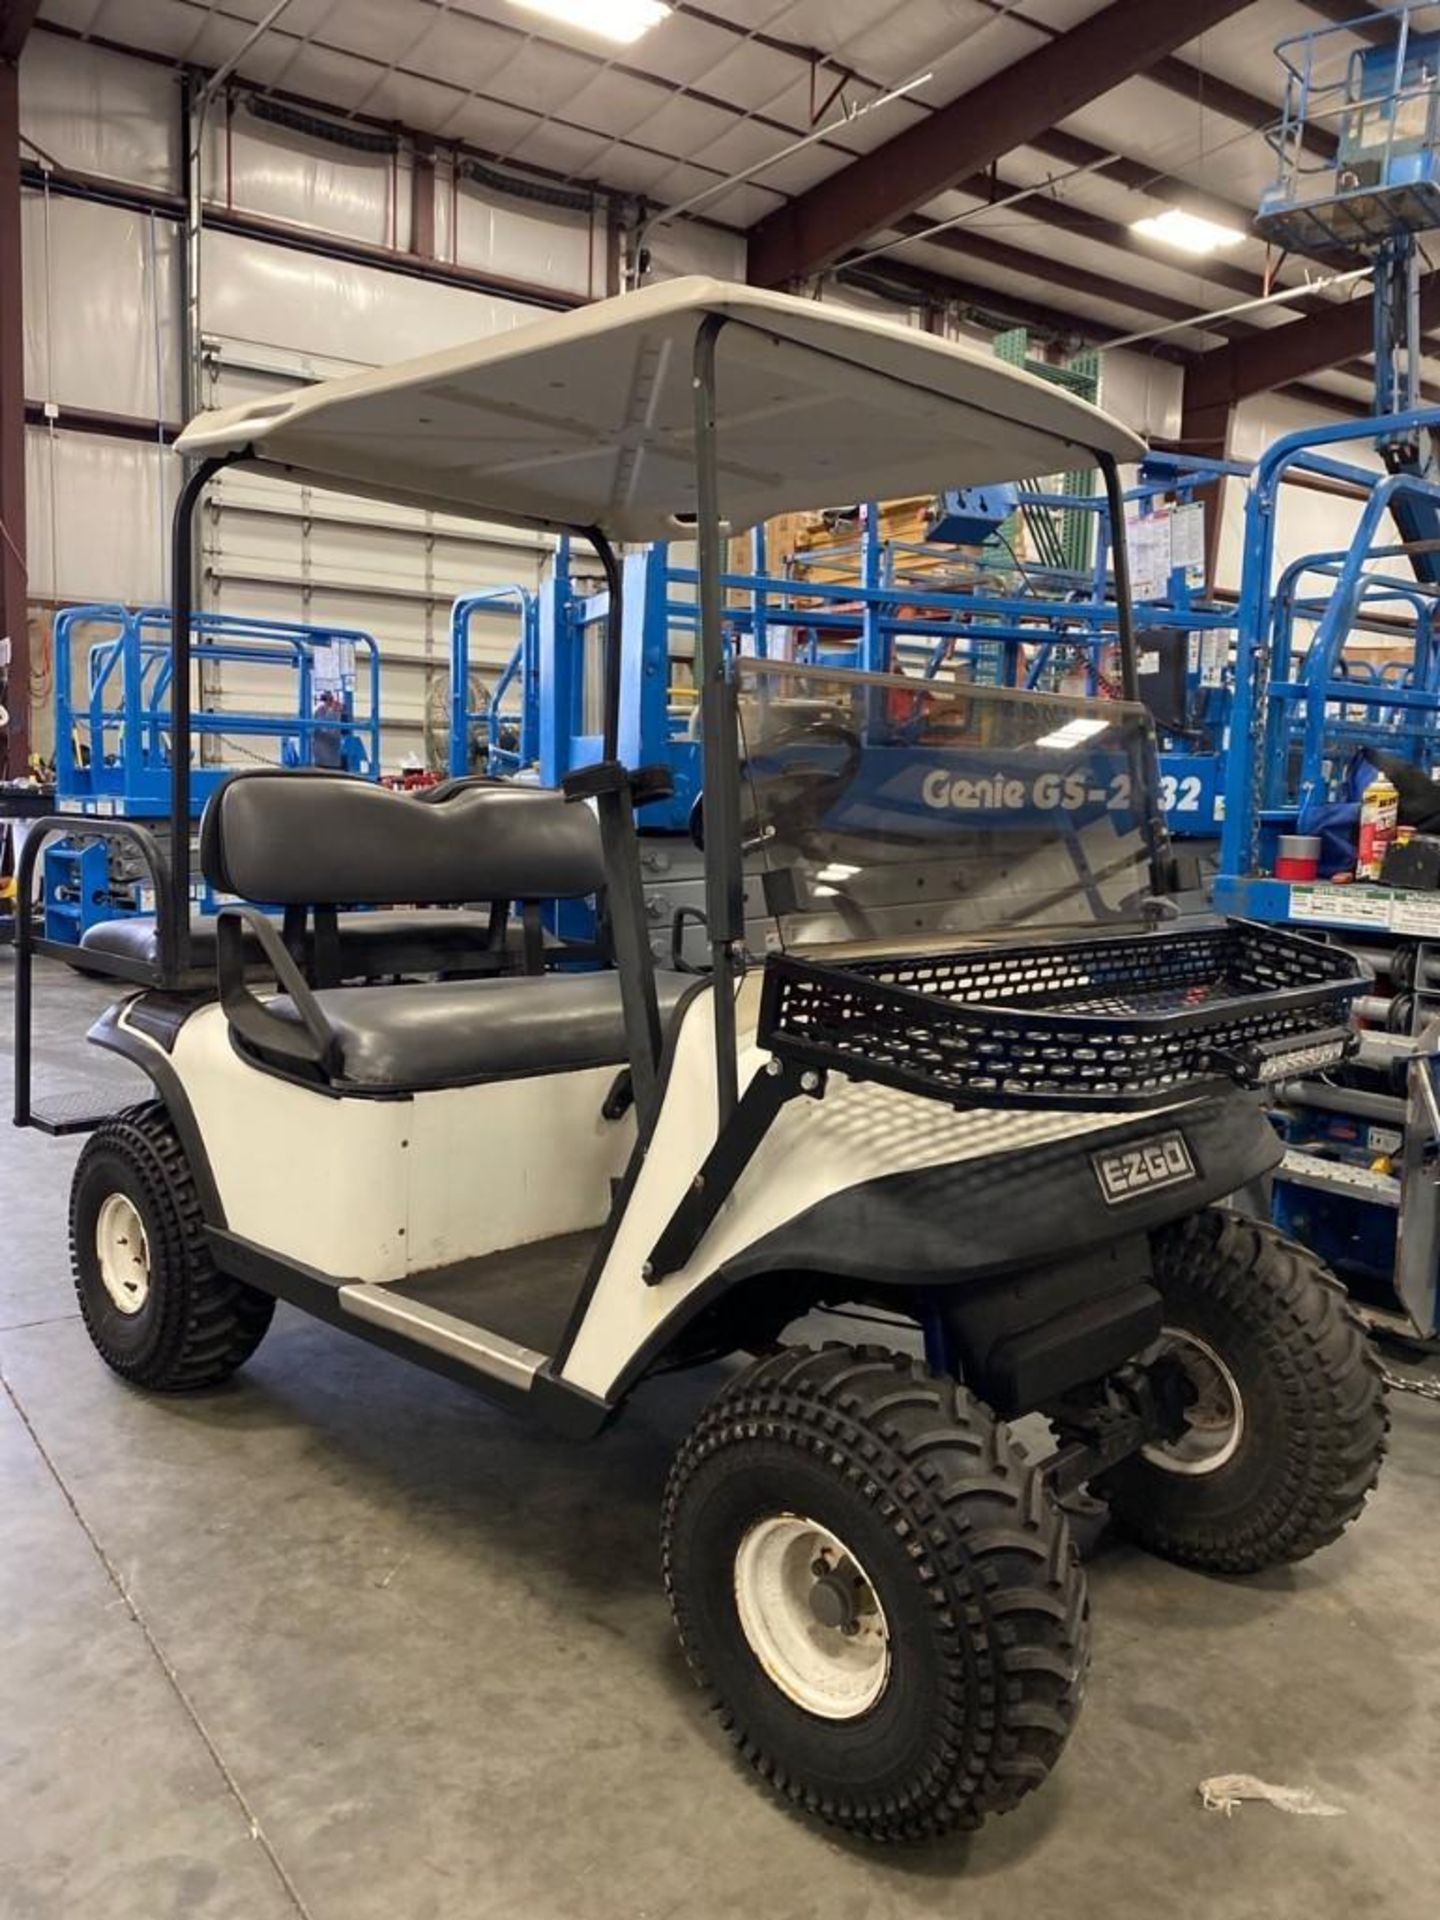 EZ-GO ELECTRIC GOLF CART, LIFT KIT, BATTERY CHARGER INCLUDED,  RUNS & DRIVES